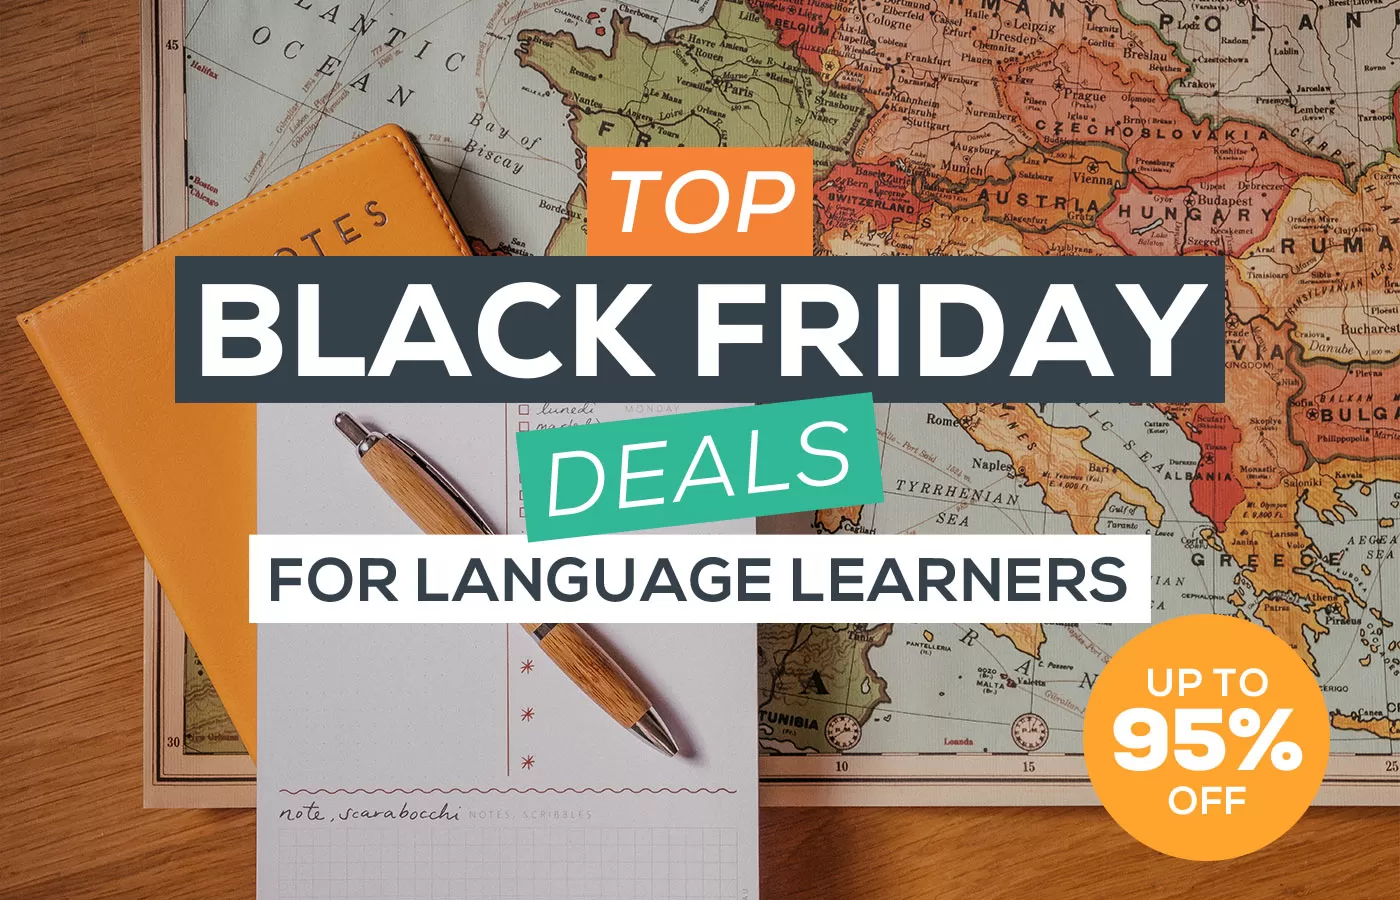 Top Black Friday and Cyber Monday Deals for Language Learners 2022